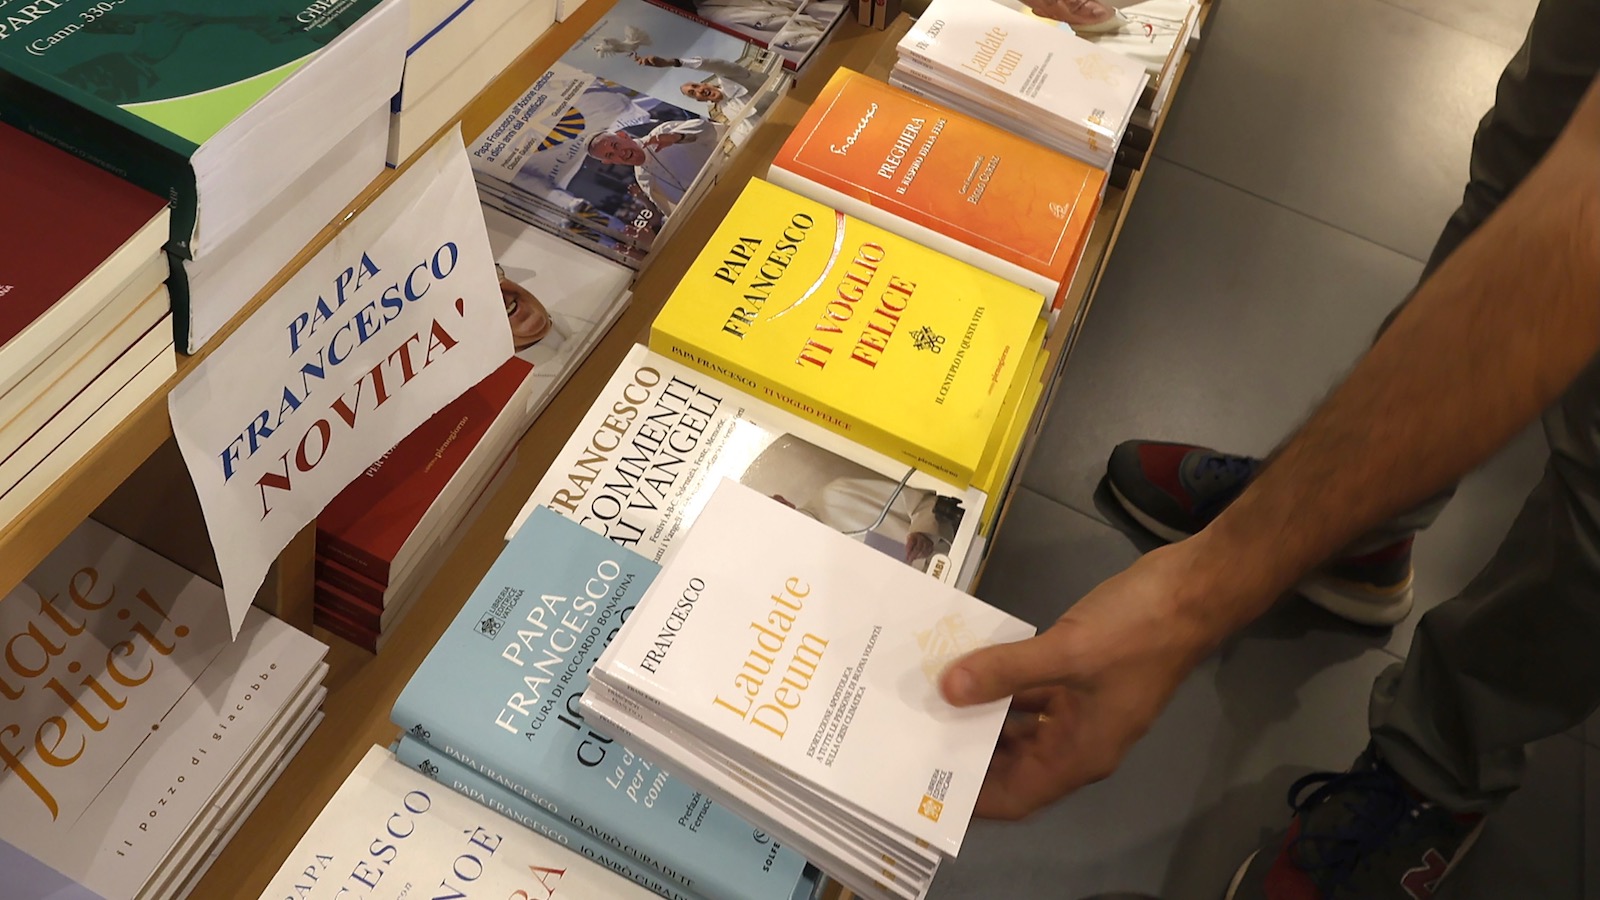 A bookseller displays a copy of Pope Francis' latest exhortaion, "Laudate Deum," for sale in a bookshop in Rome.